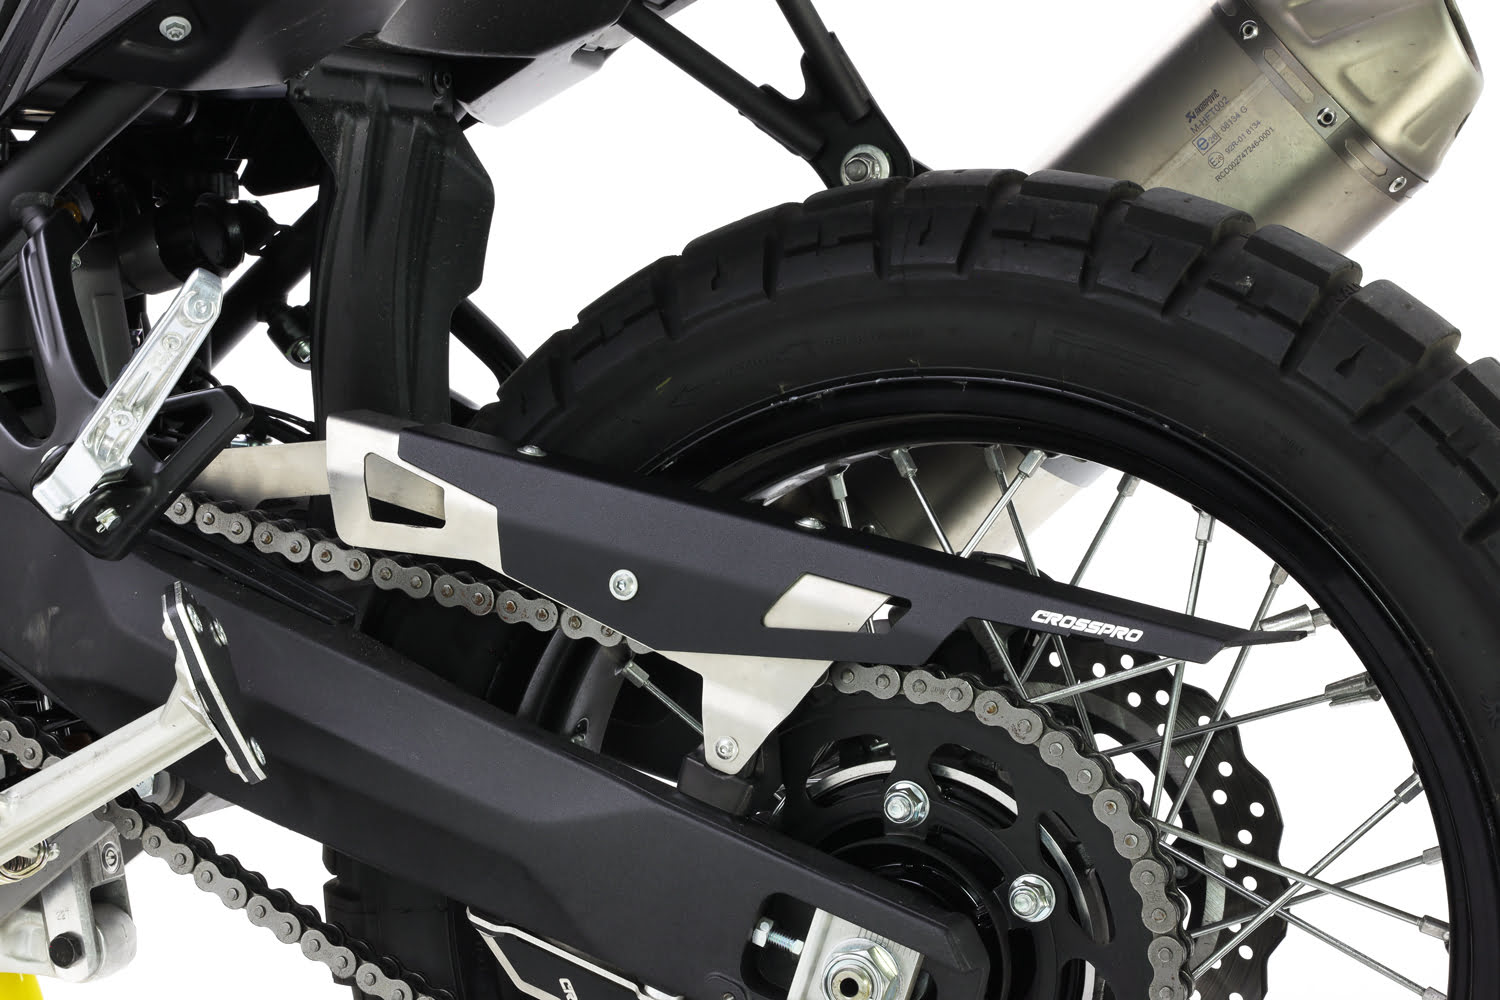 Chain Guard Brushed stainless steel / Textured Black